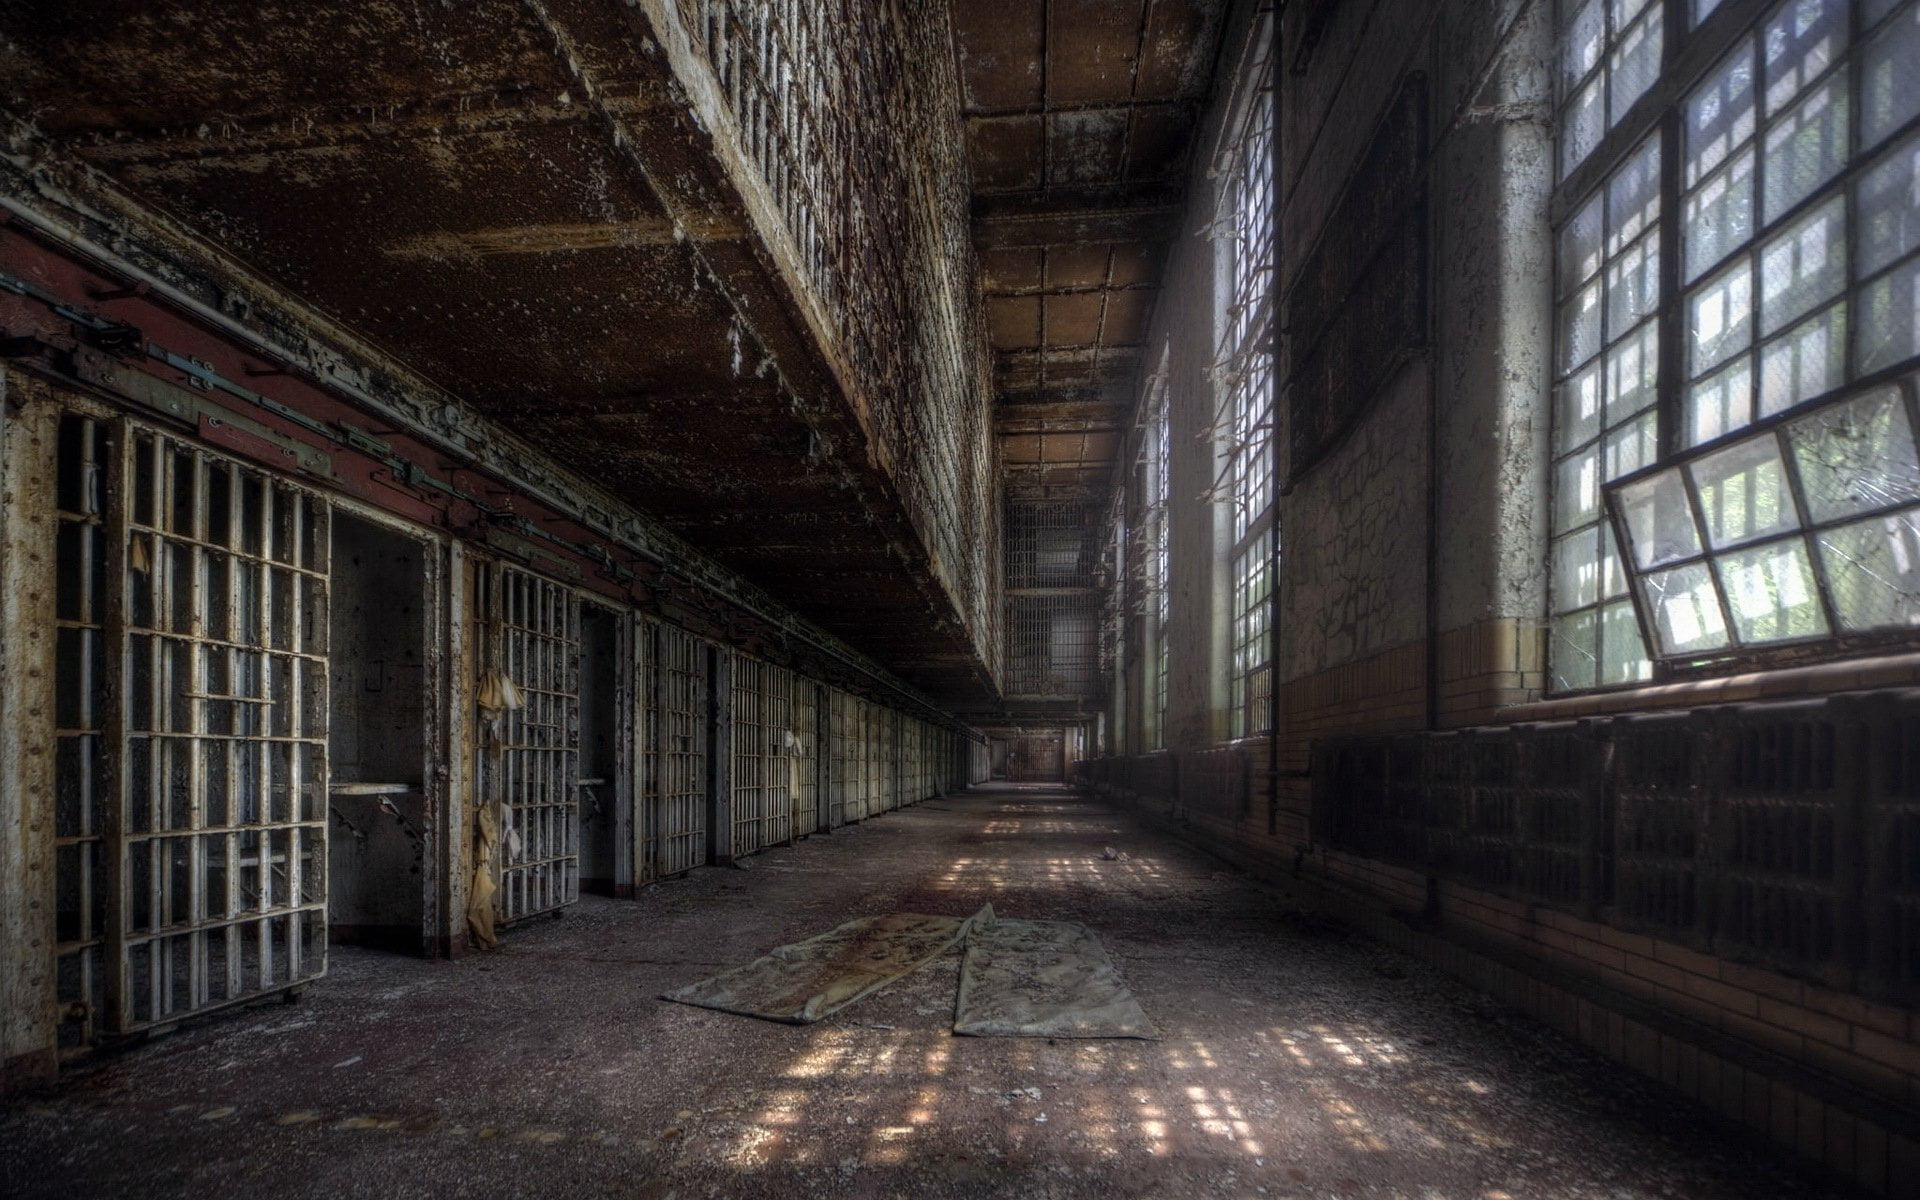 Man Made, Prison, Abandoned, Creepy, Jail, architecture, building